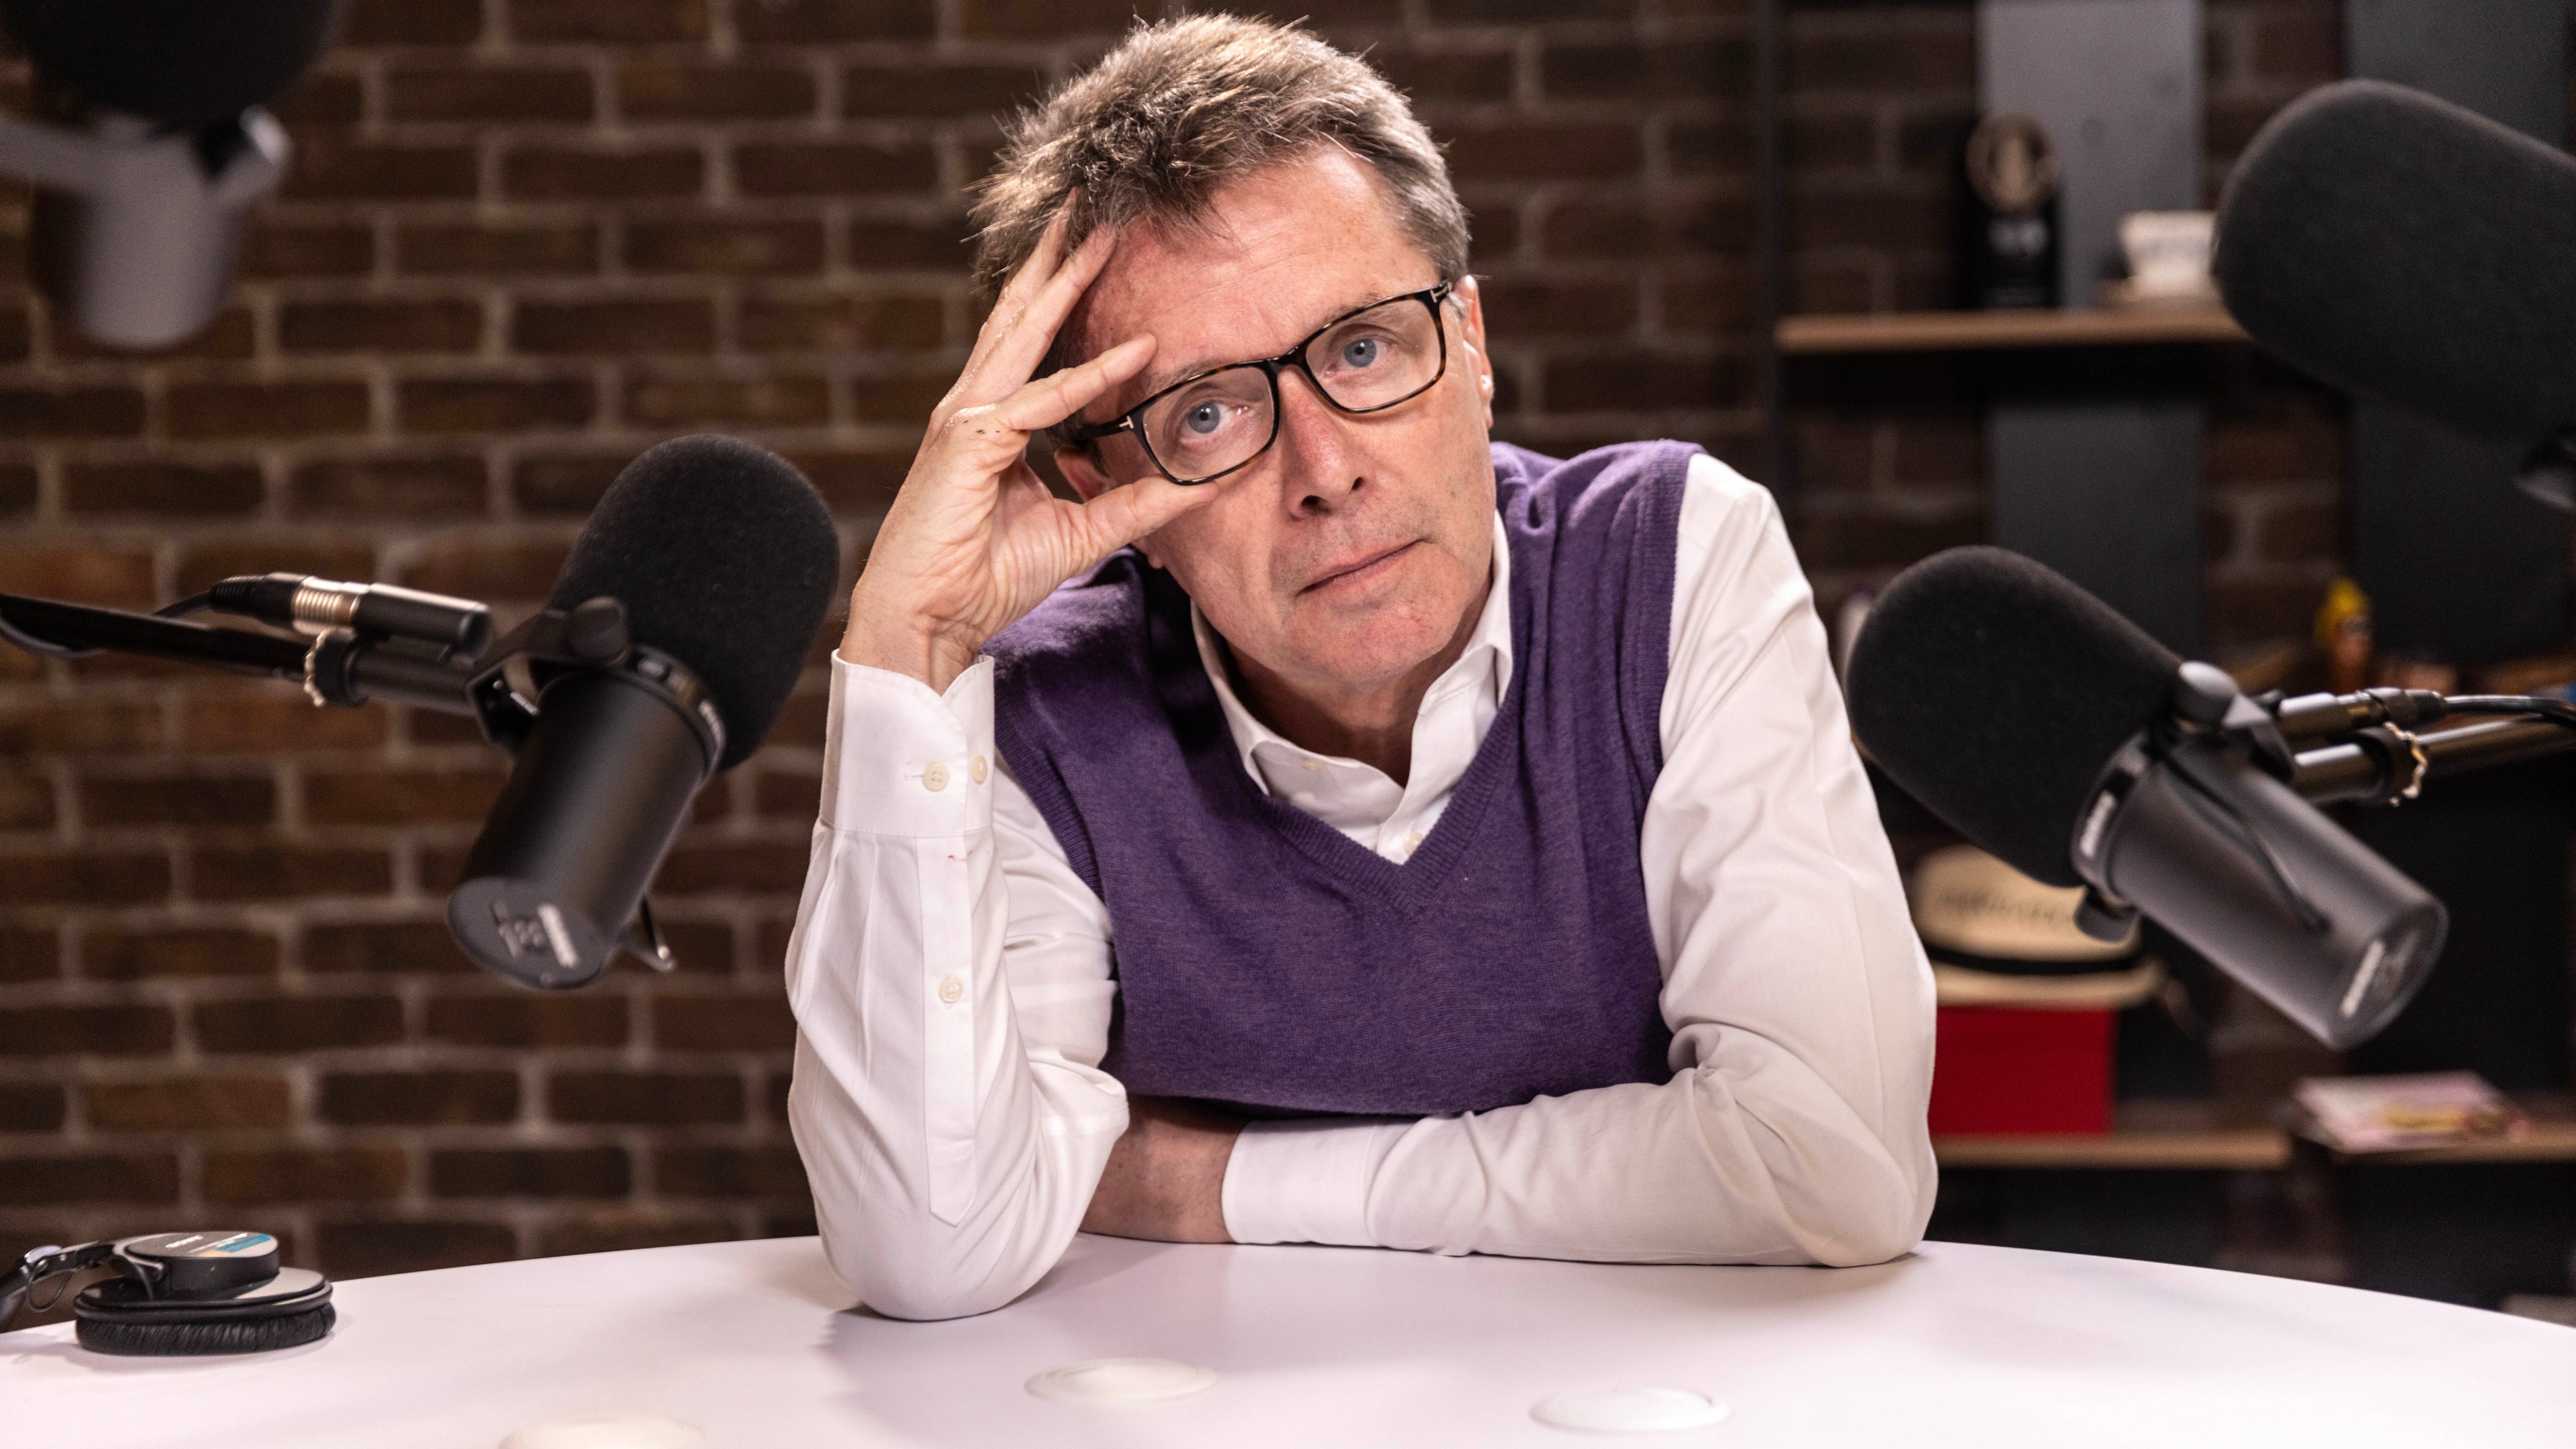 Nicky Campbell relives ‘knuckle attack’ by ‘sadist’ teacher